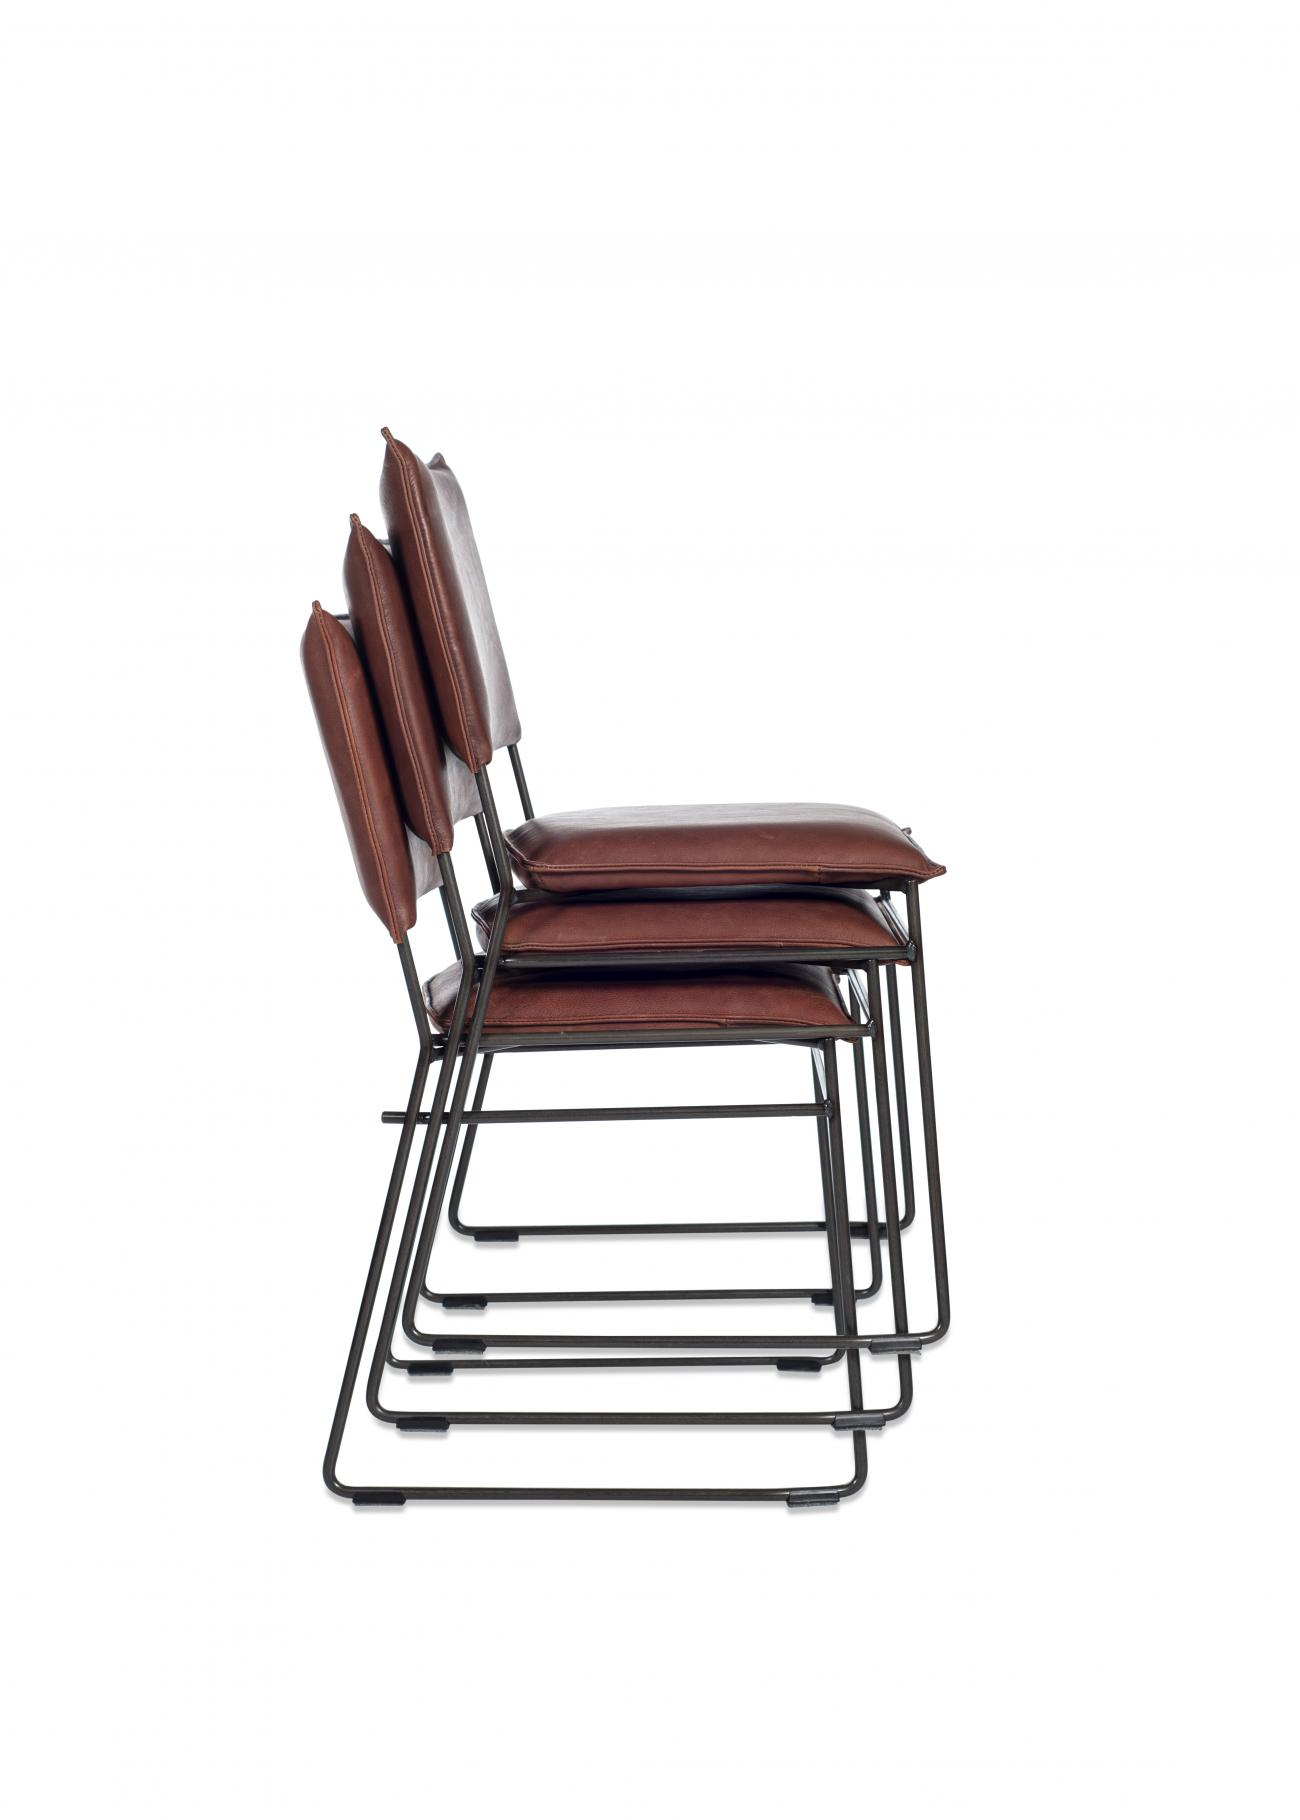 https://www.fundesign.nl/media/catalog/product/n/o/norman_dining_chair_old_glory_stackable_bonanza_british_tan_zij.jpg